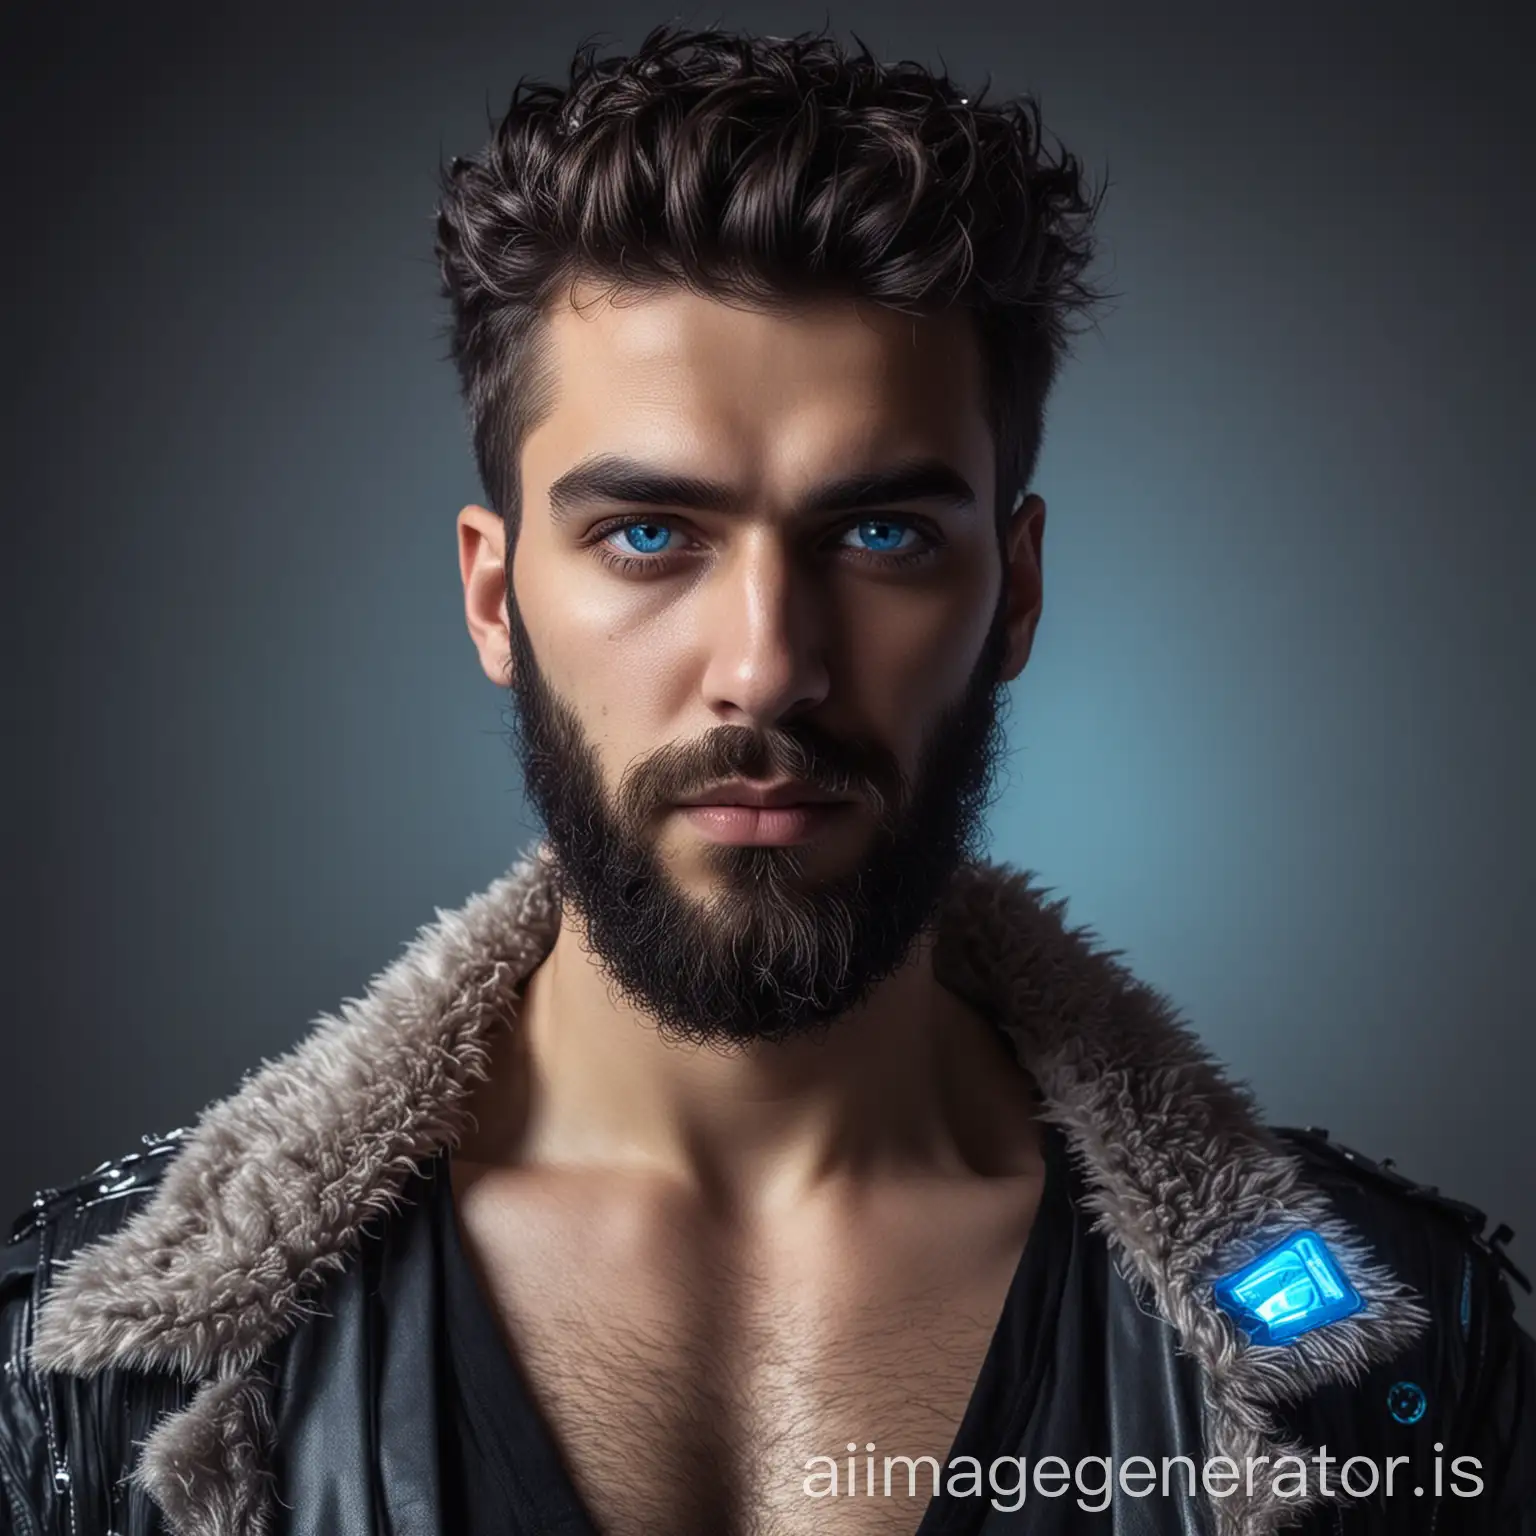 Futuristic-Cyberpunk-Portrait-Middle-Eastern-Man-with-Neon-Blue-Eyes-and-Holographic-Hacker-Elements